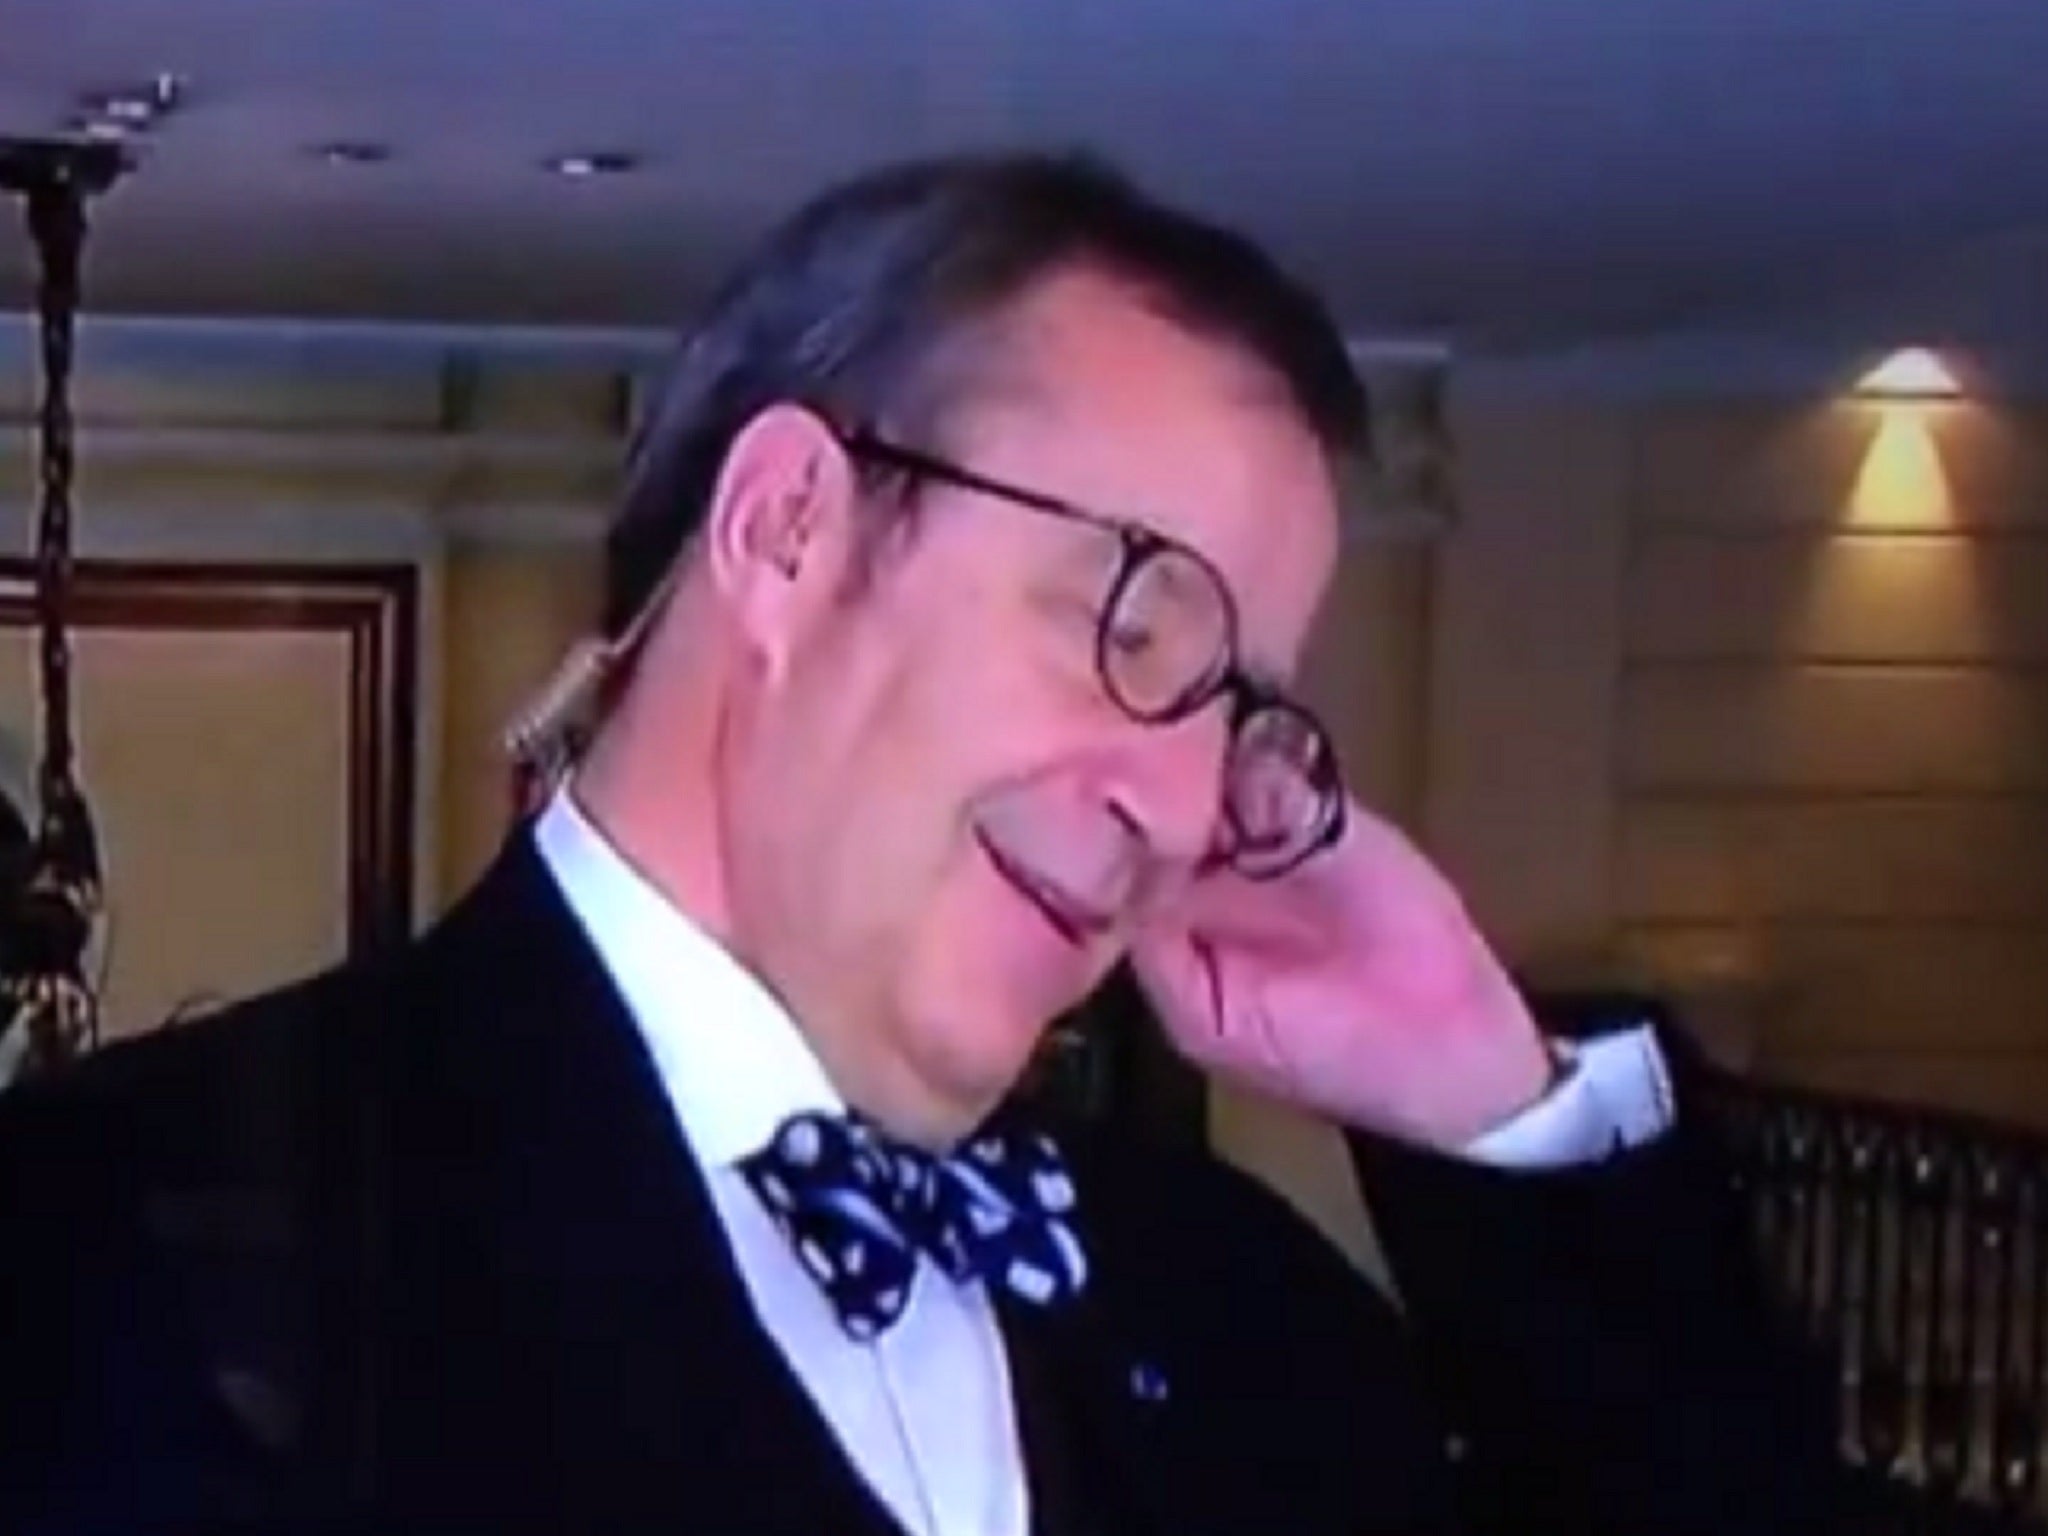 Toomas Ilves was annoyed with being called his middle name on Sky News